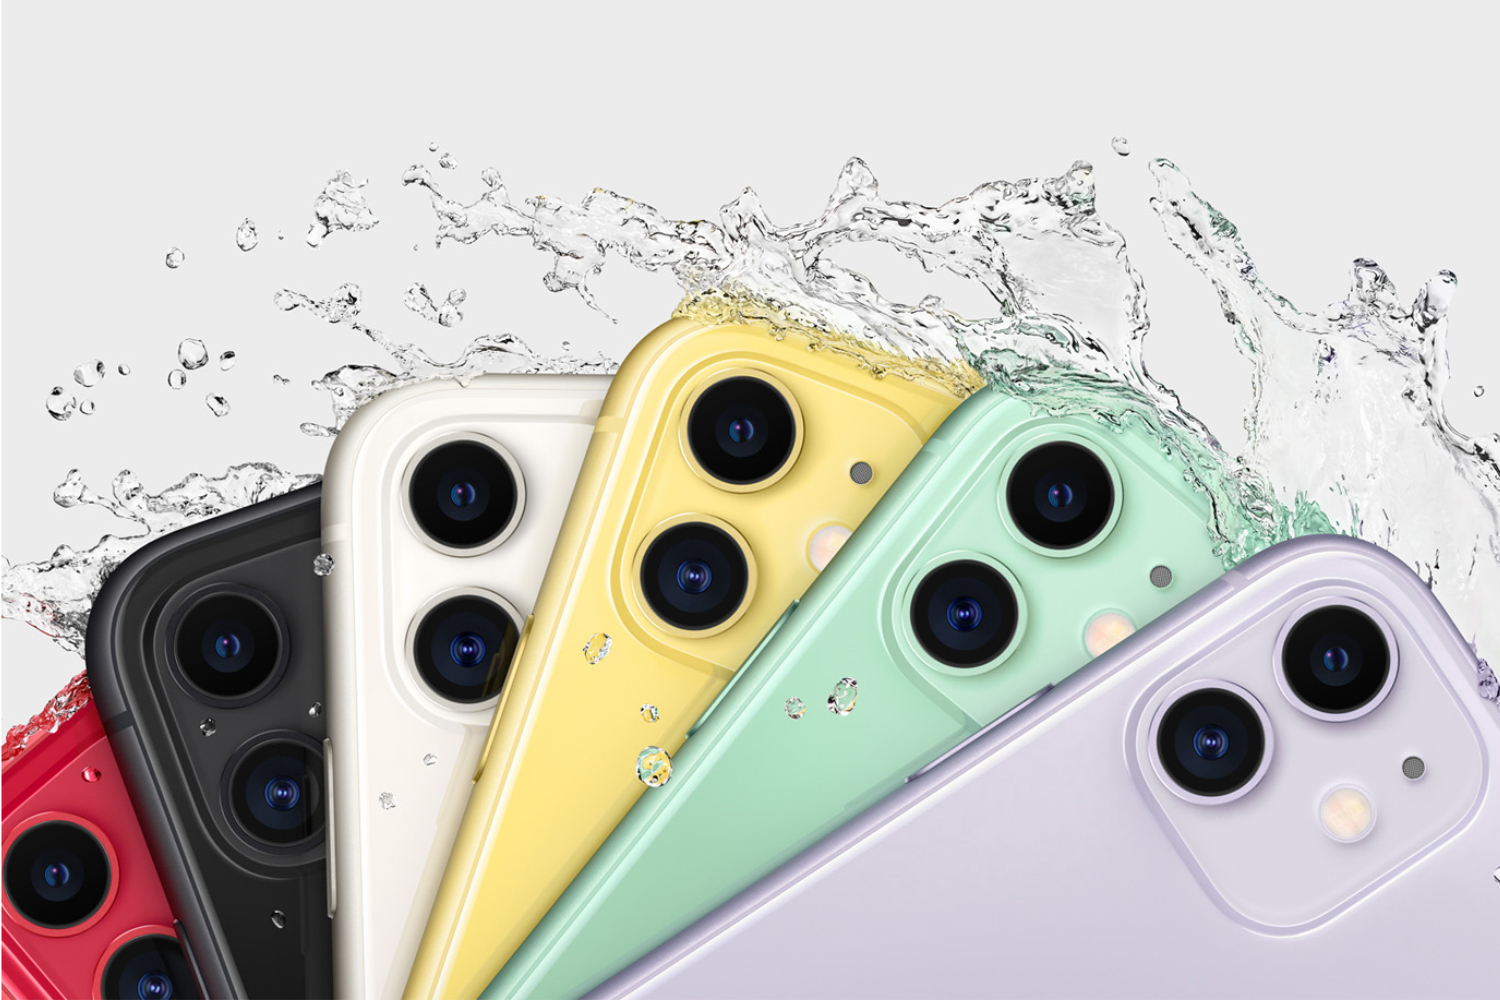 Here’s what Apple tells you not to do with a wet iPhone